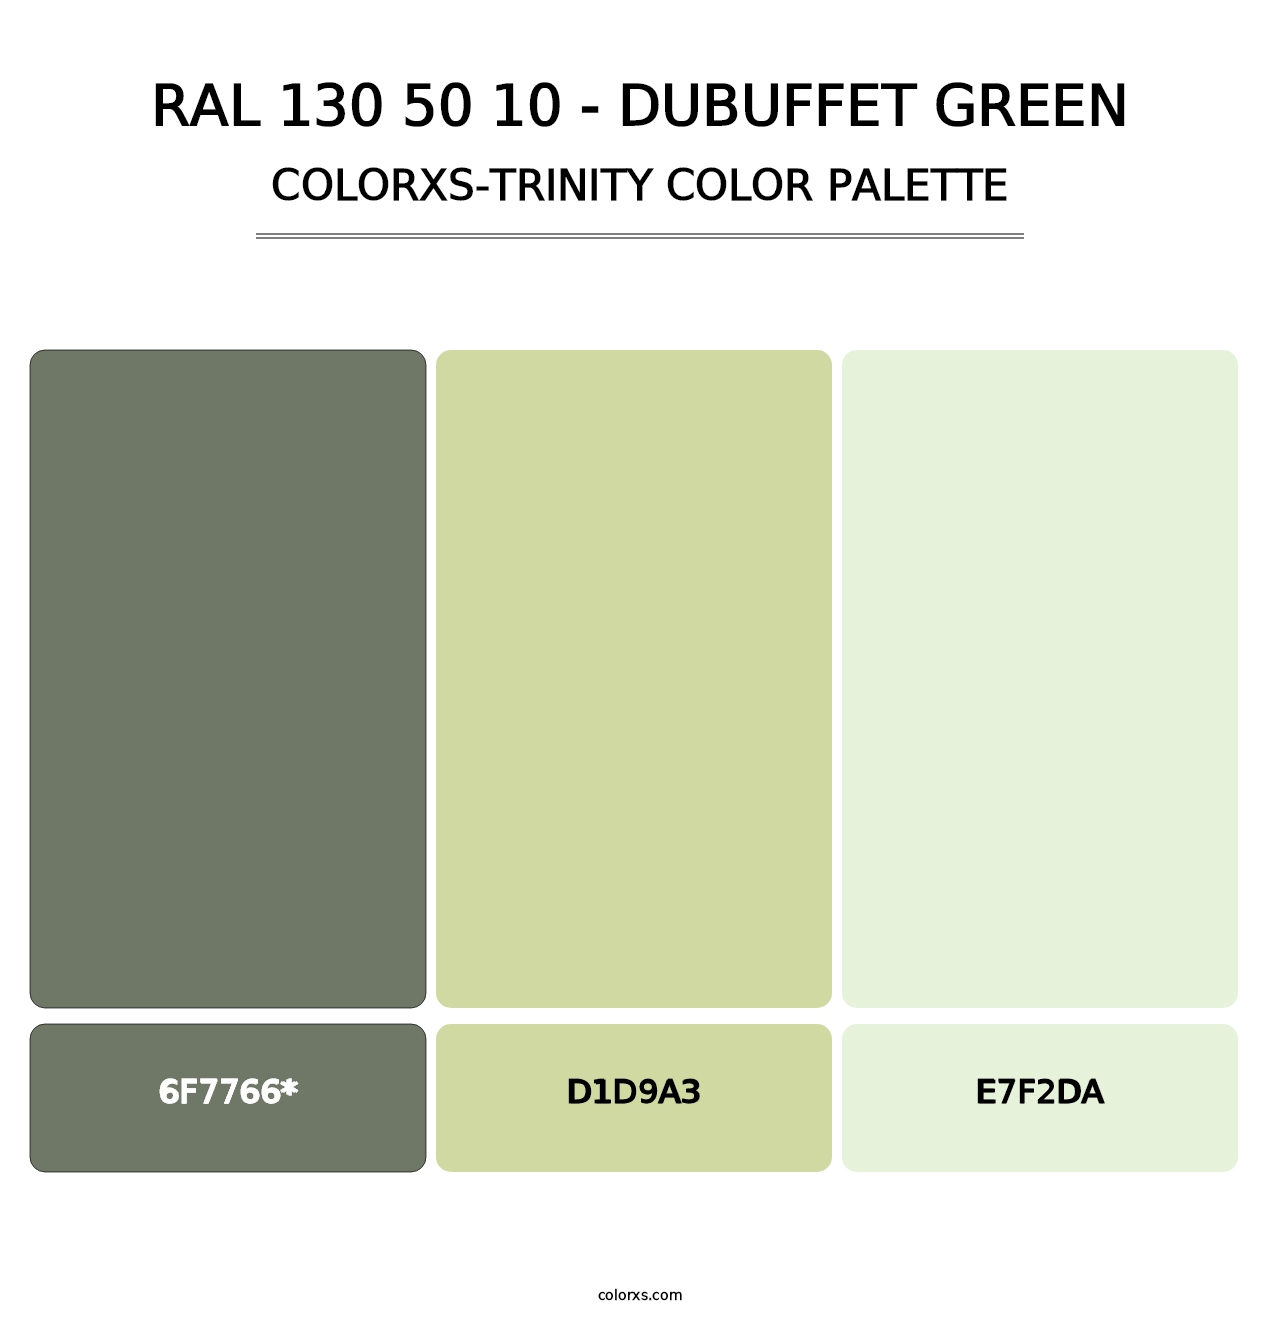 RAL 130 50 10 - Dubuffet Green - Colorxs Trinity Palette